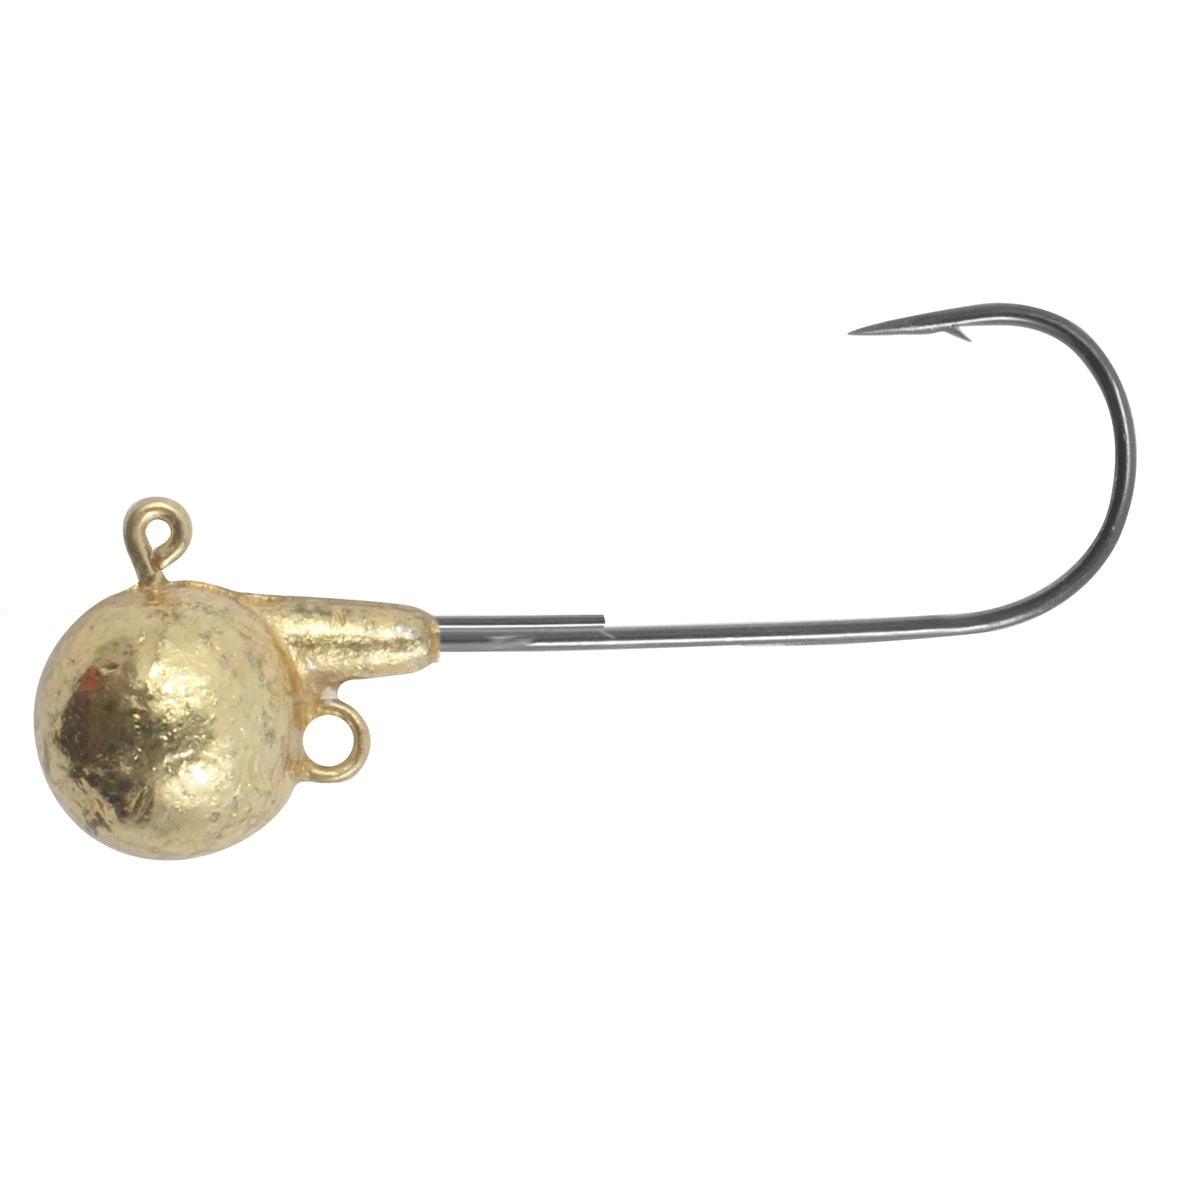 Northland Fishing Tackle Fire-Ball Spin Jig - 1/4 oz. - Firetiger